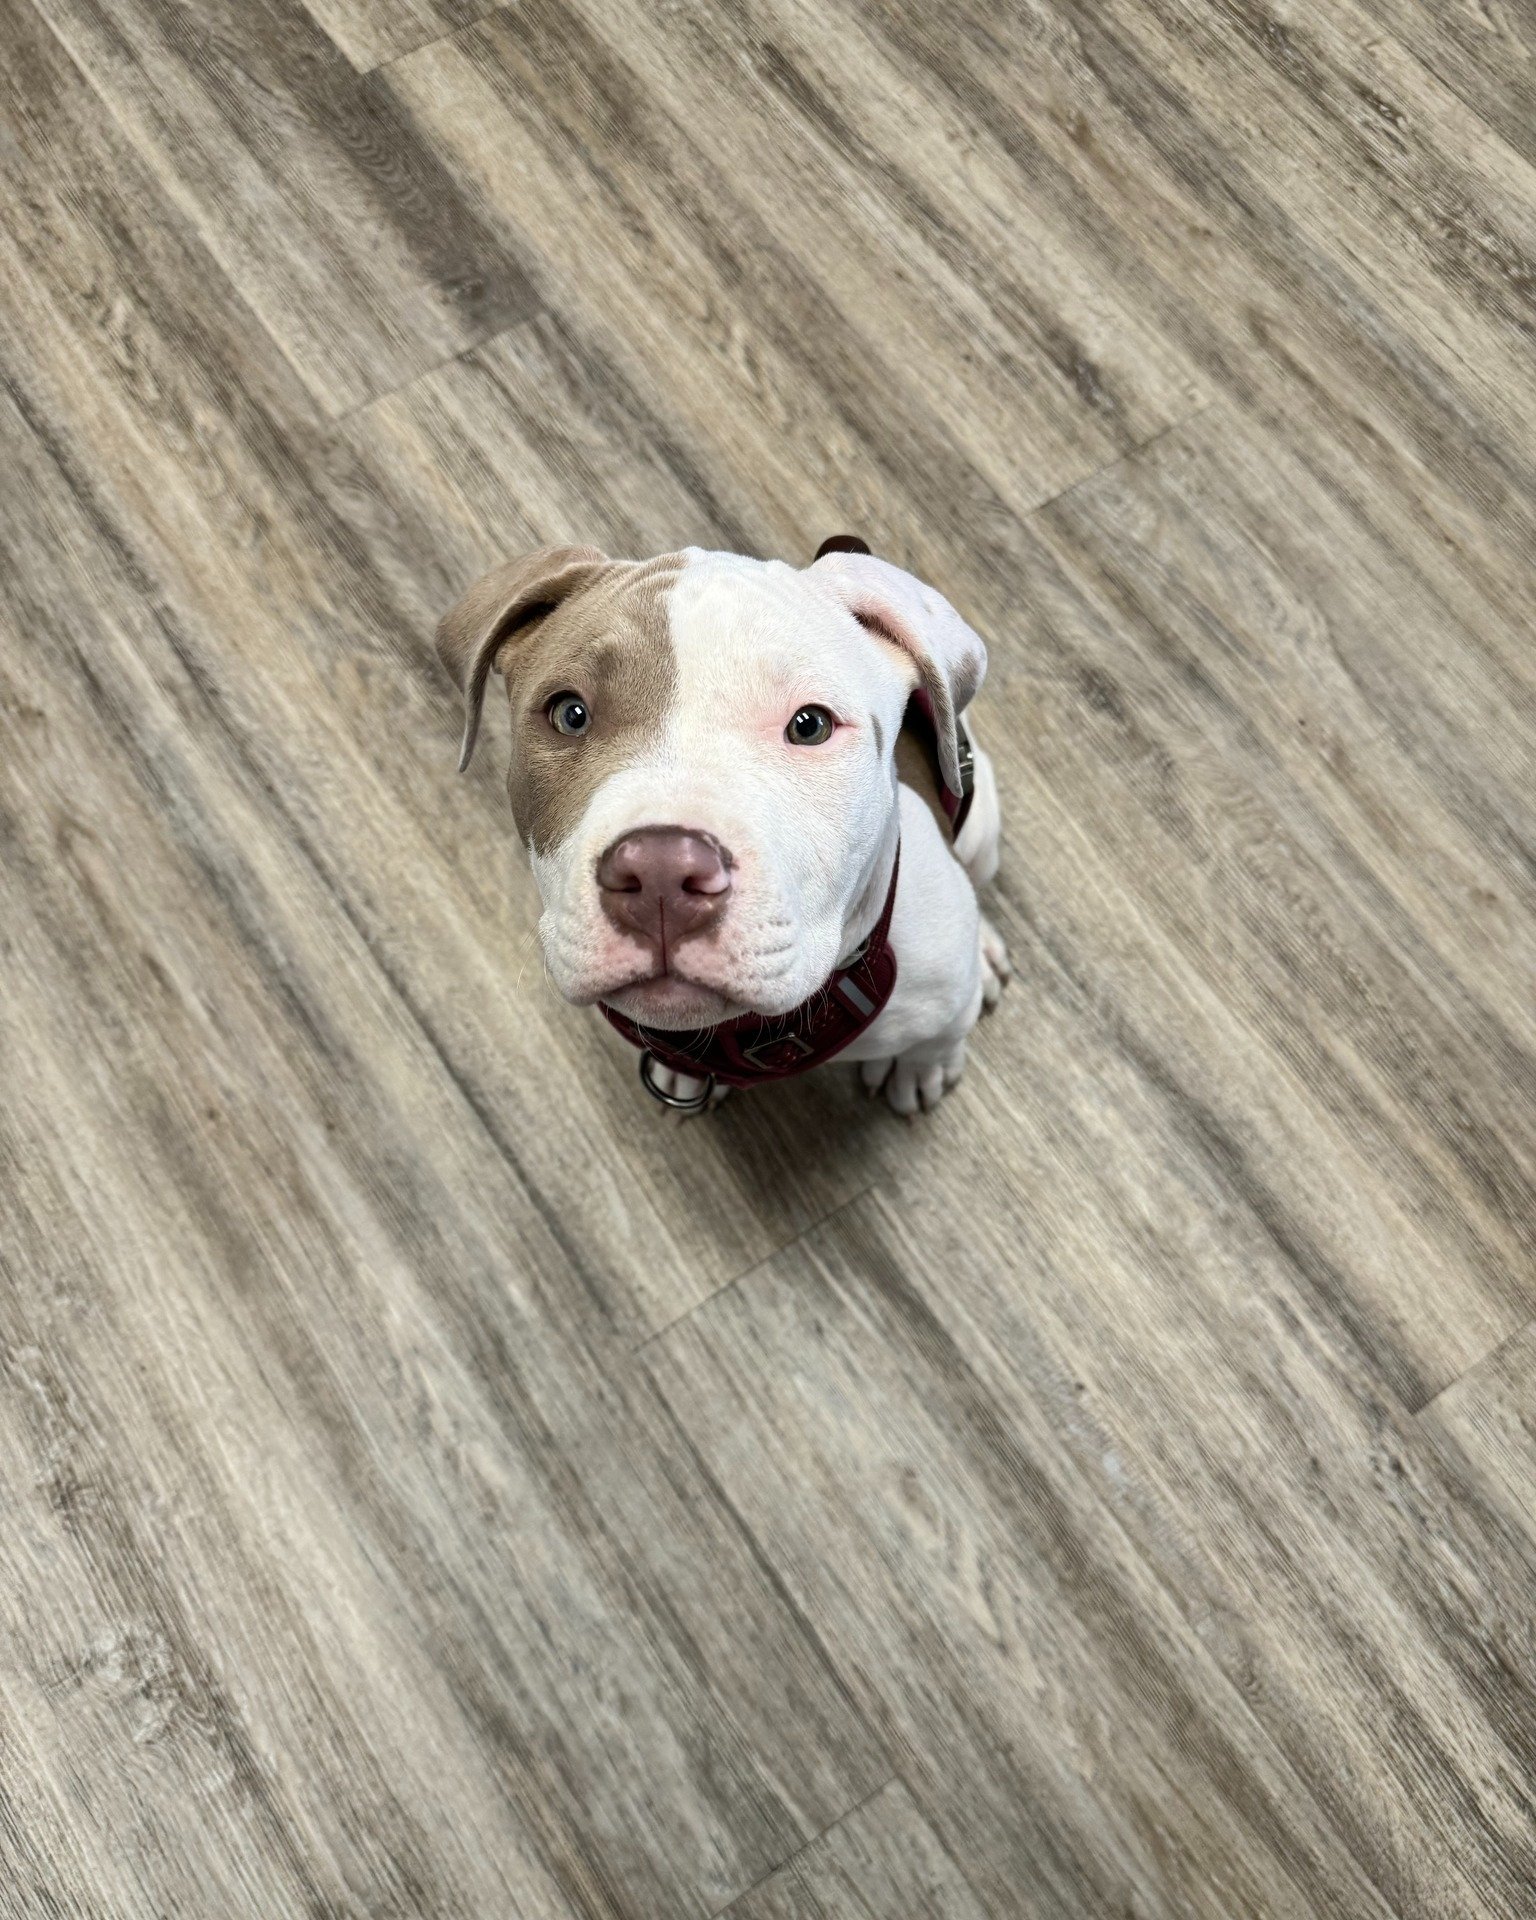 ✨Pet of the Week✨

Willow, the 13-week-old Pit Bull Terrier mix, has stolen our hearts from day one! 💖 From her very first puppy exam at 7 weeks old to her recent visit for a skin recheck, Willow has been spreading joy and love everywhere she goes. 